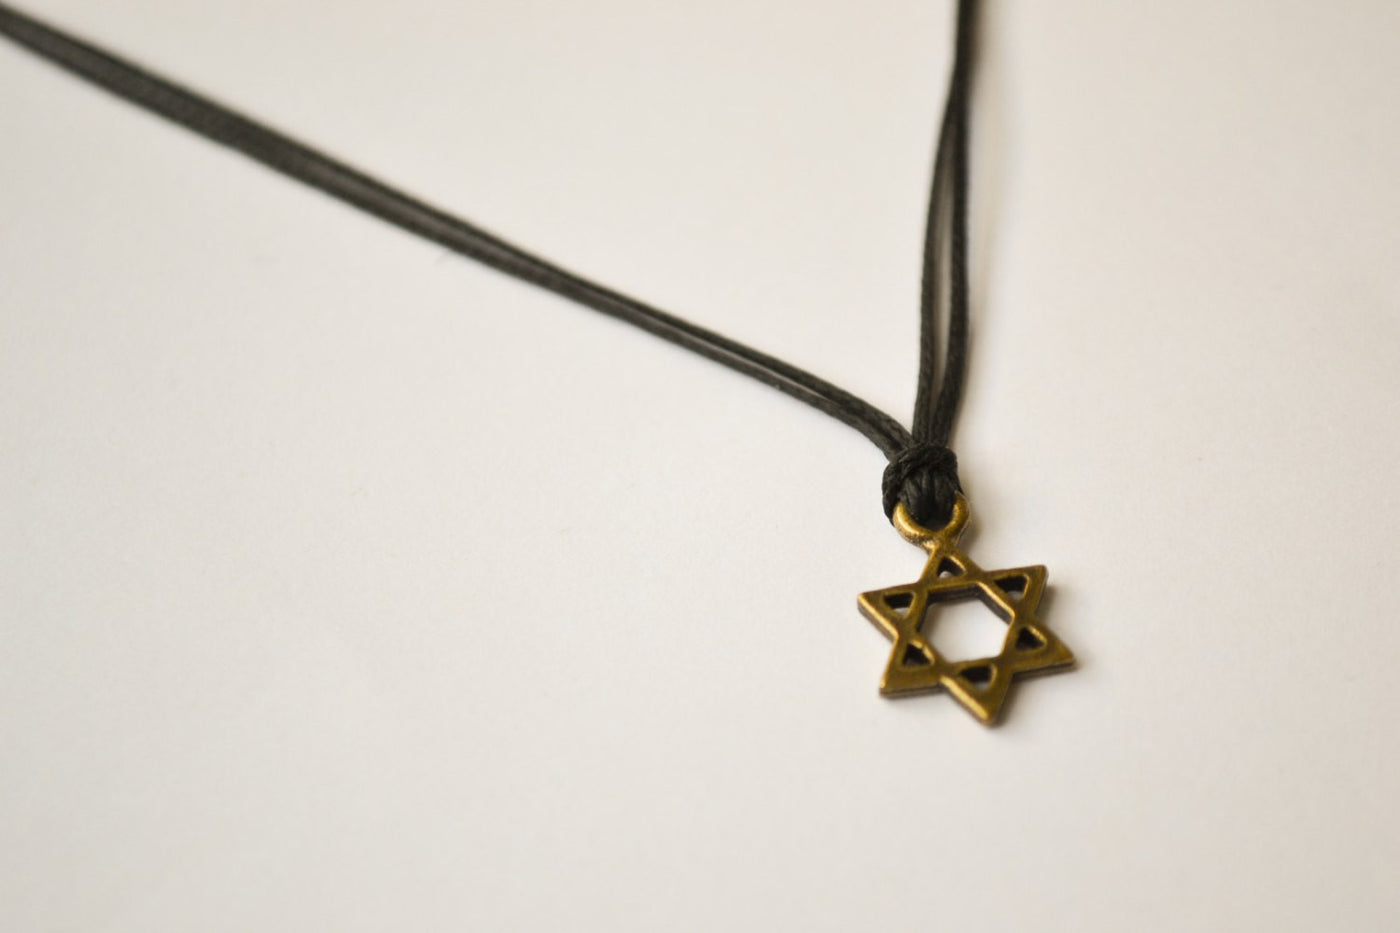 Men's Star of David Necklace, Magen David Pendant Necklace, Jewish Jewelry,  Judaica Necklace for Men, Religious Gift, Bar Mitzvah Gift - Etsy